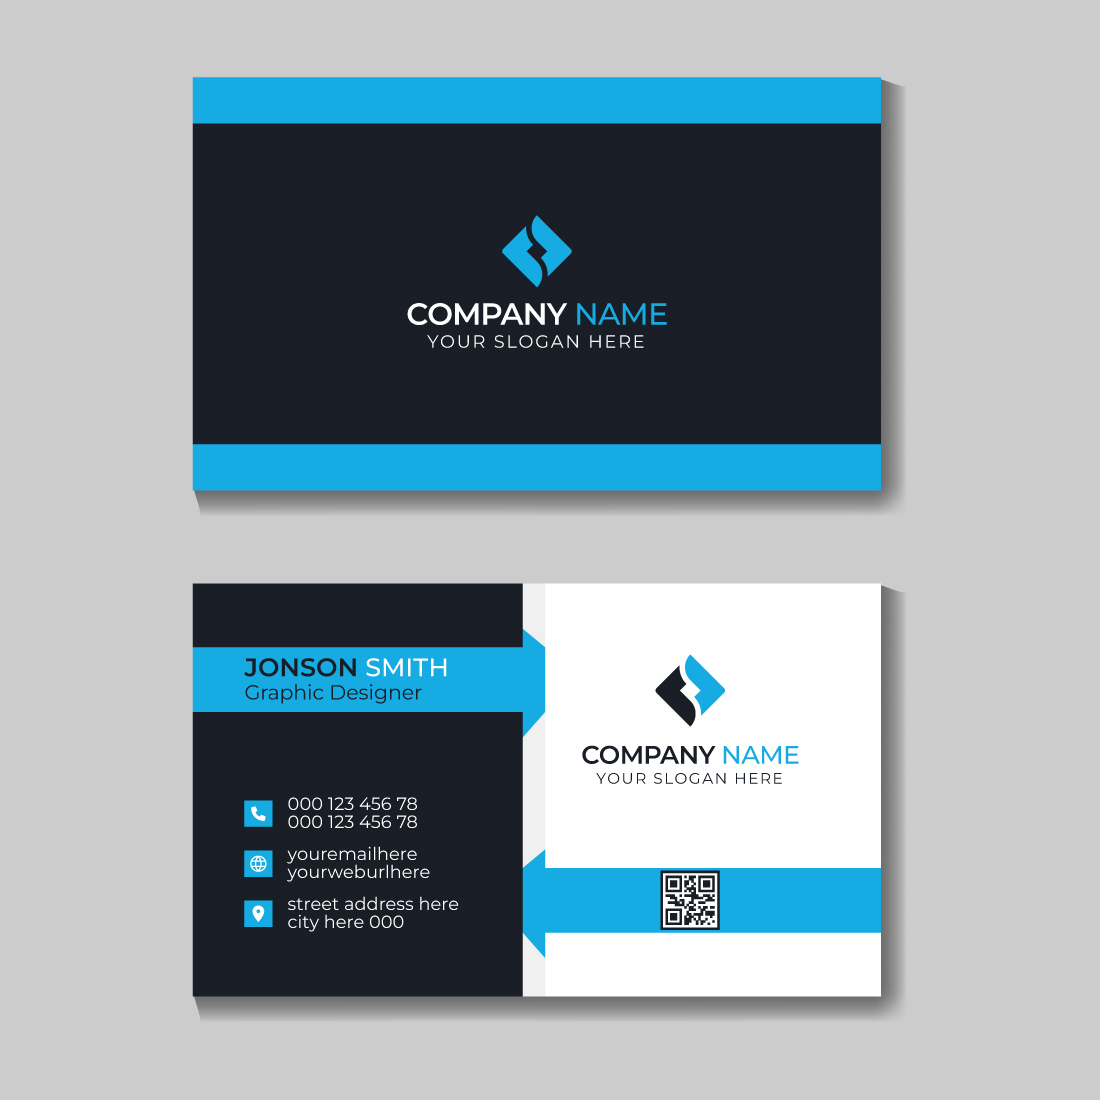 4 Colors Corporate Minimal Creative Business Card Design Template cover image.